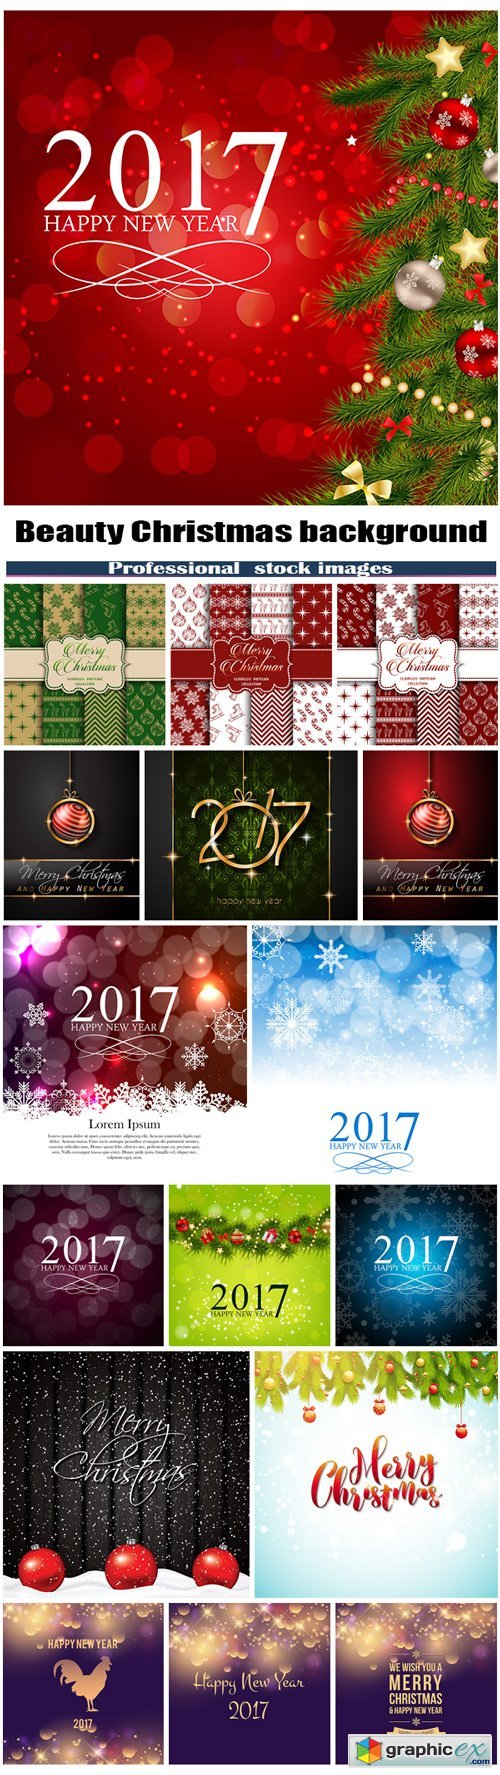 Beauty Christmas background and seamless patterns